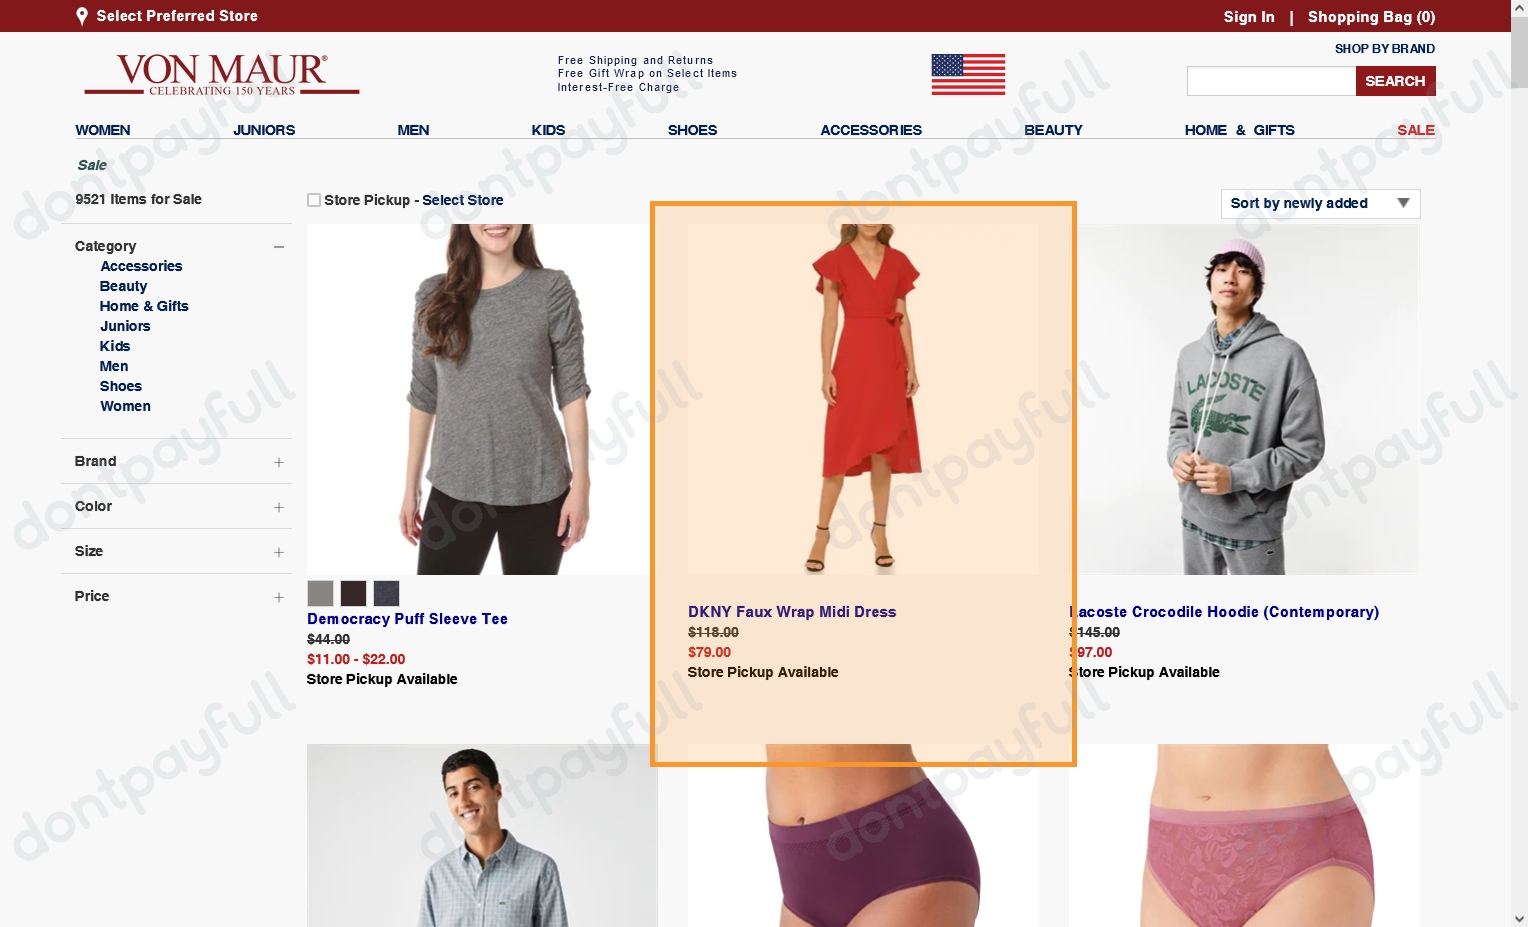 Let's Scope Out Von Maur Coupons, Sales, Free Shipping, Interest